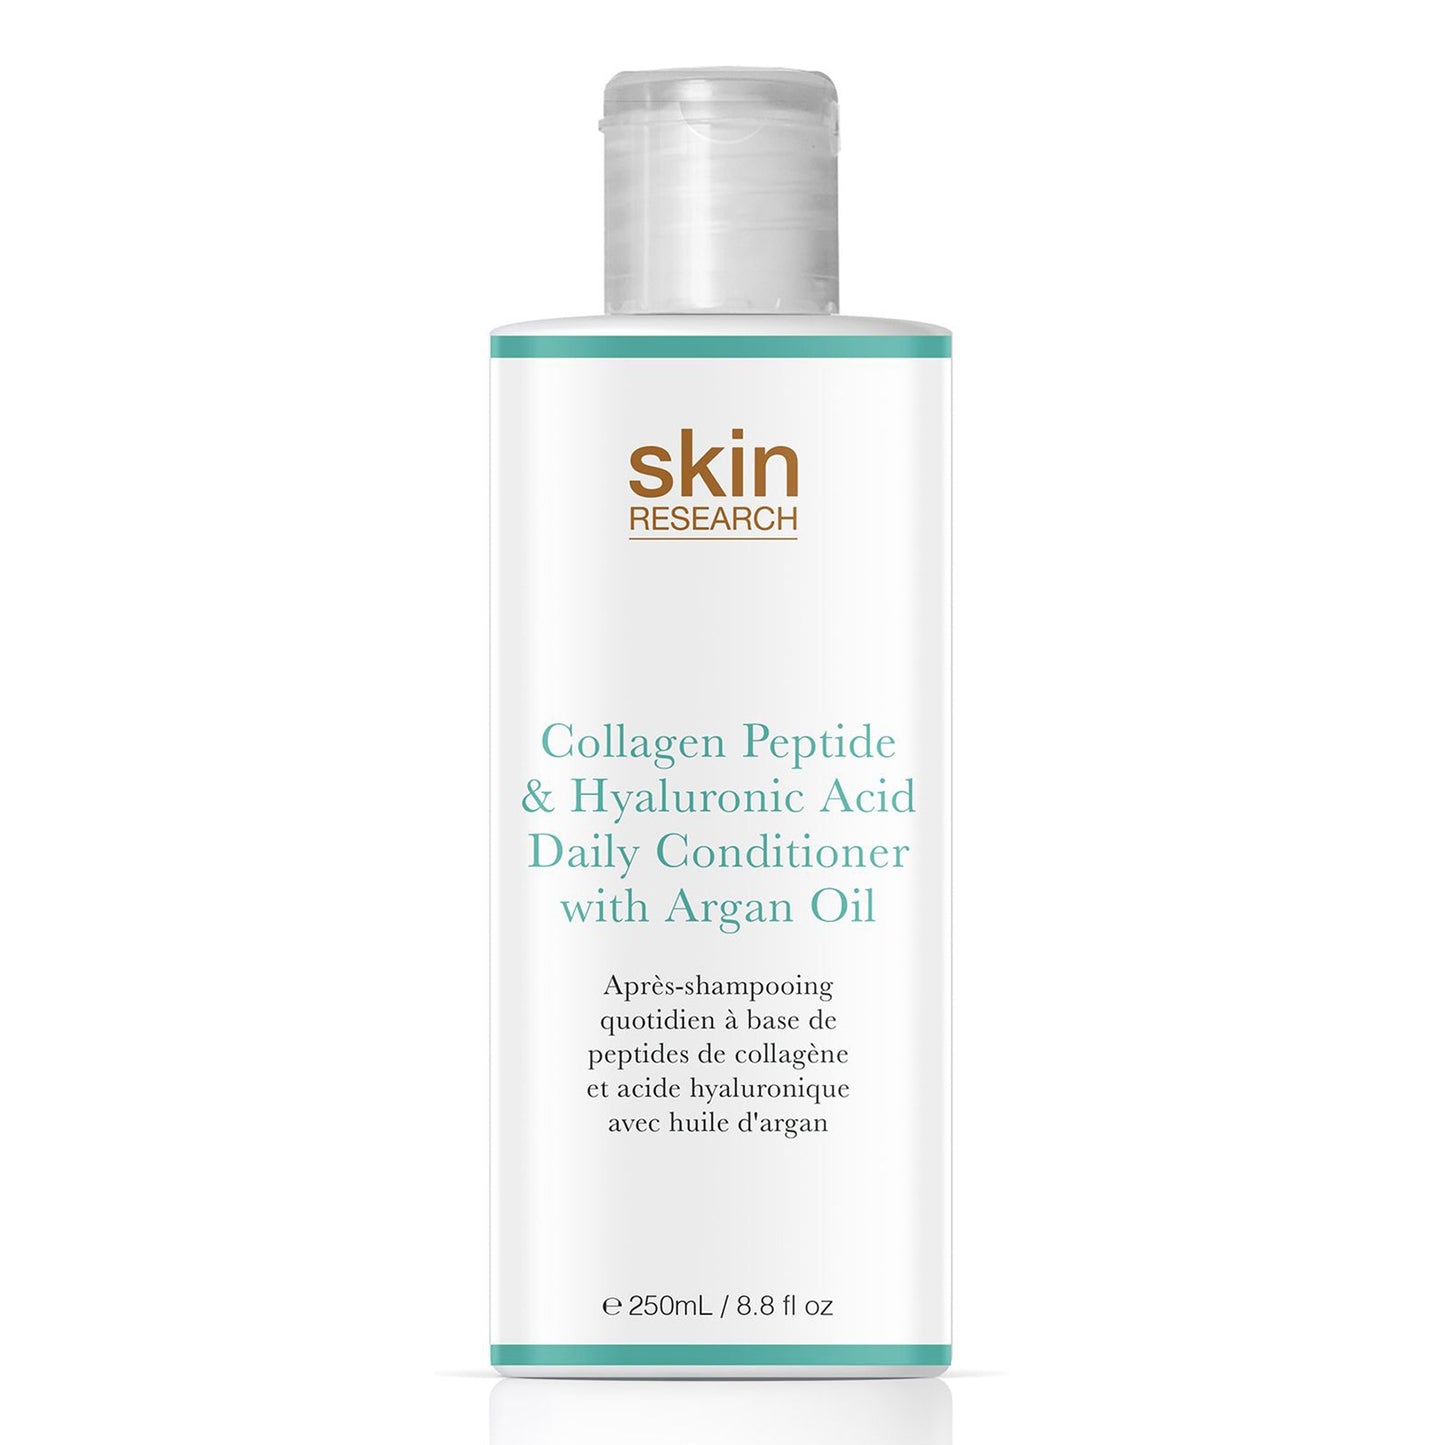 Collagen Peptide & Hyaluronic Acid Daily Conditioner with Argan Oil 250ml - Le Ravishe Beauty Mart